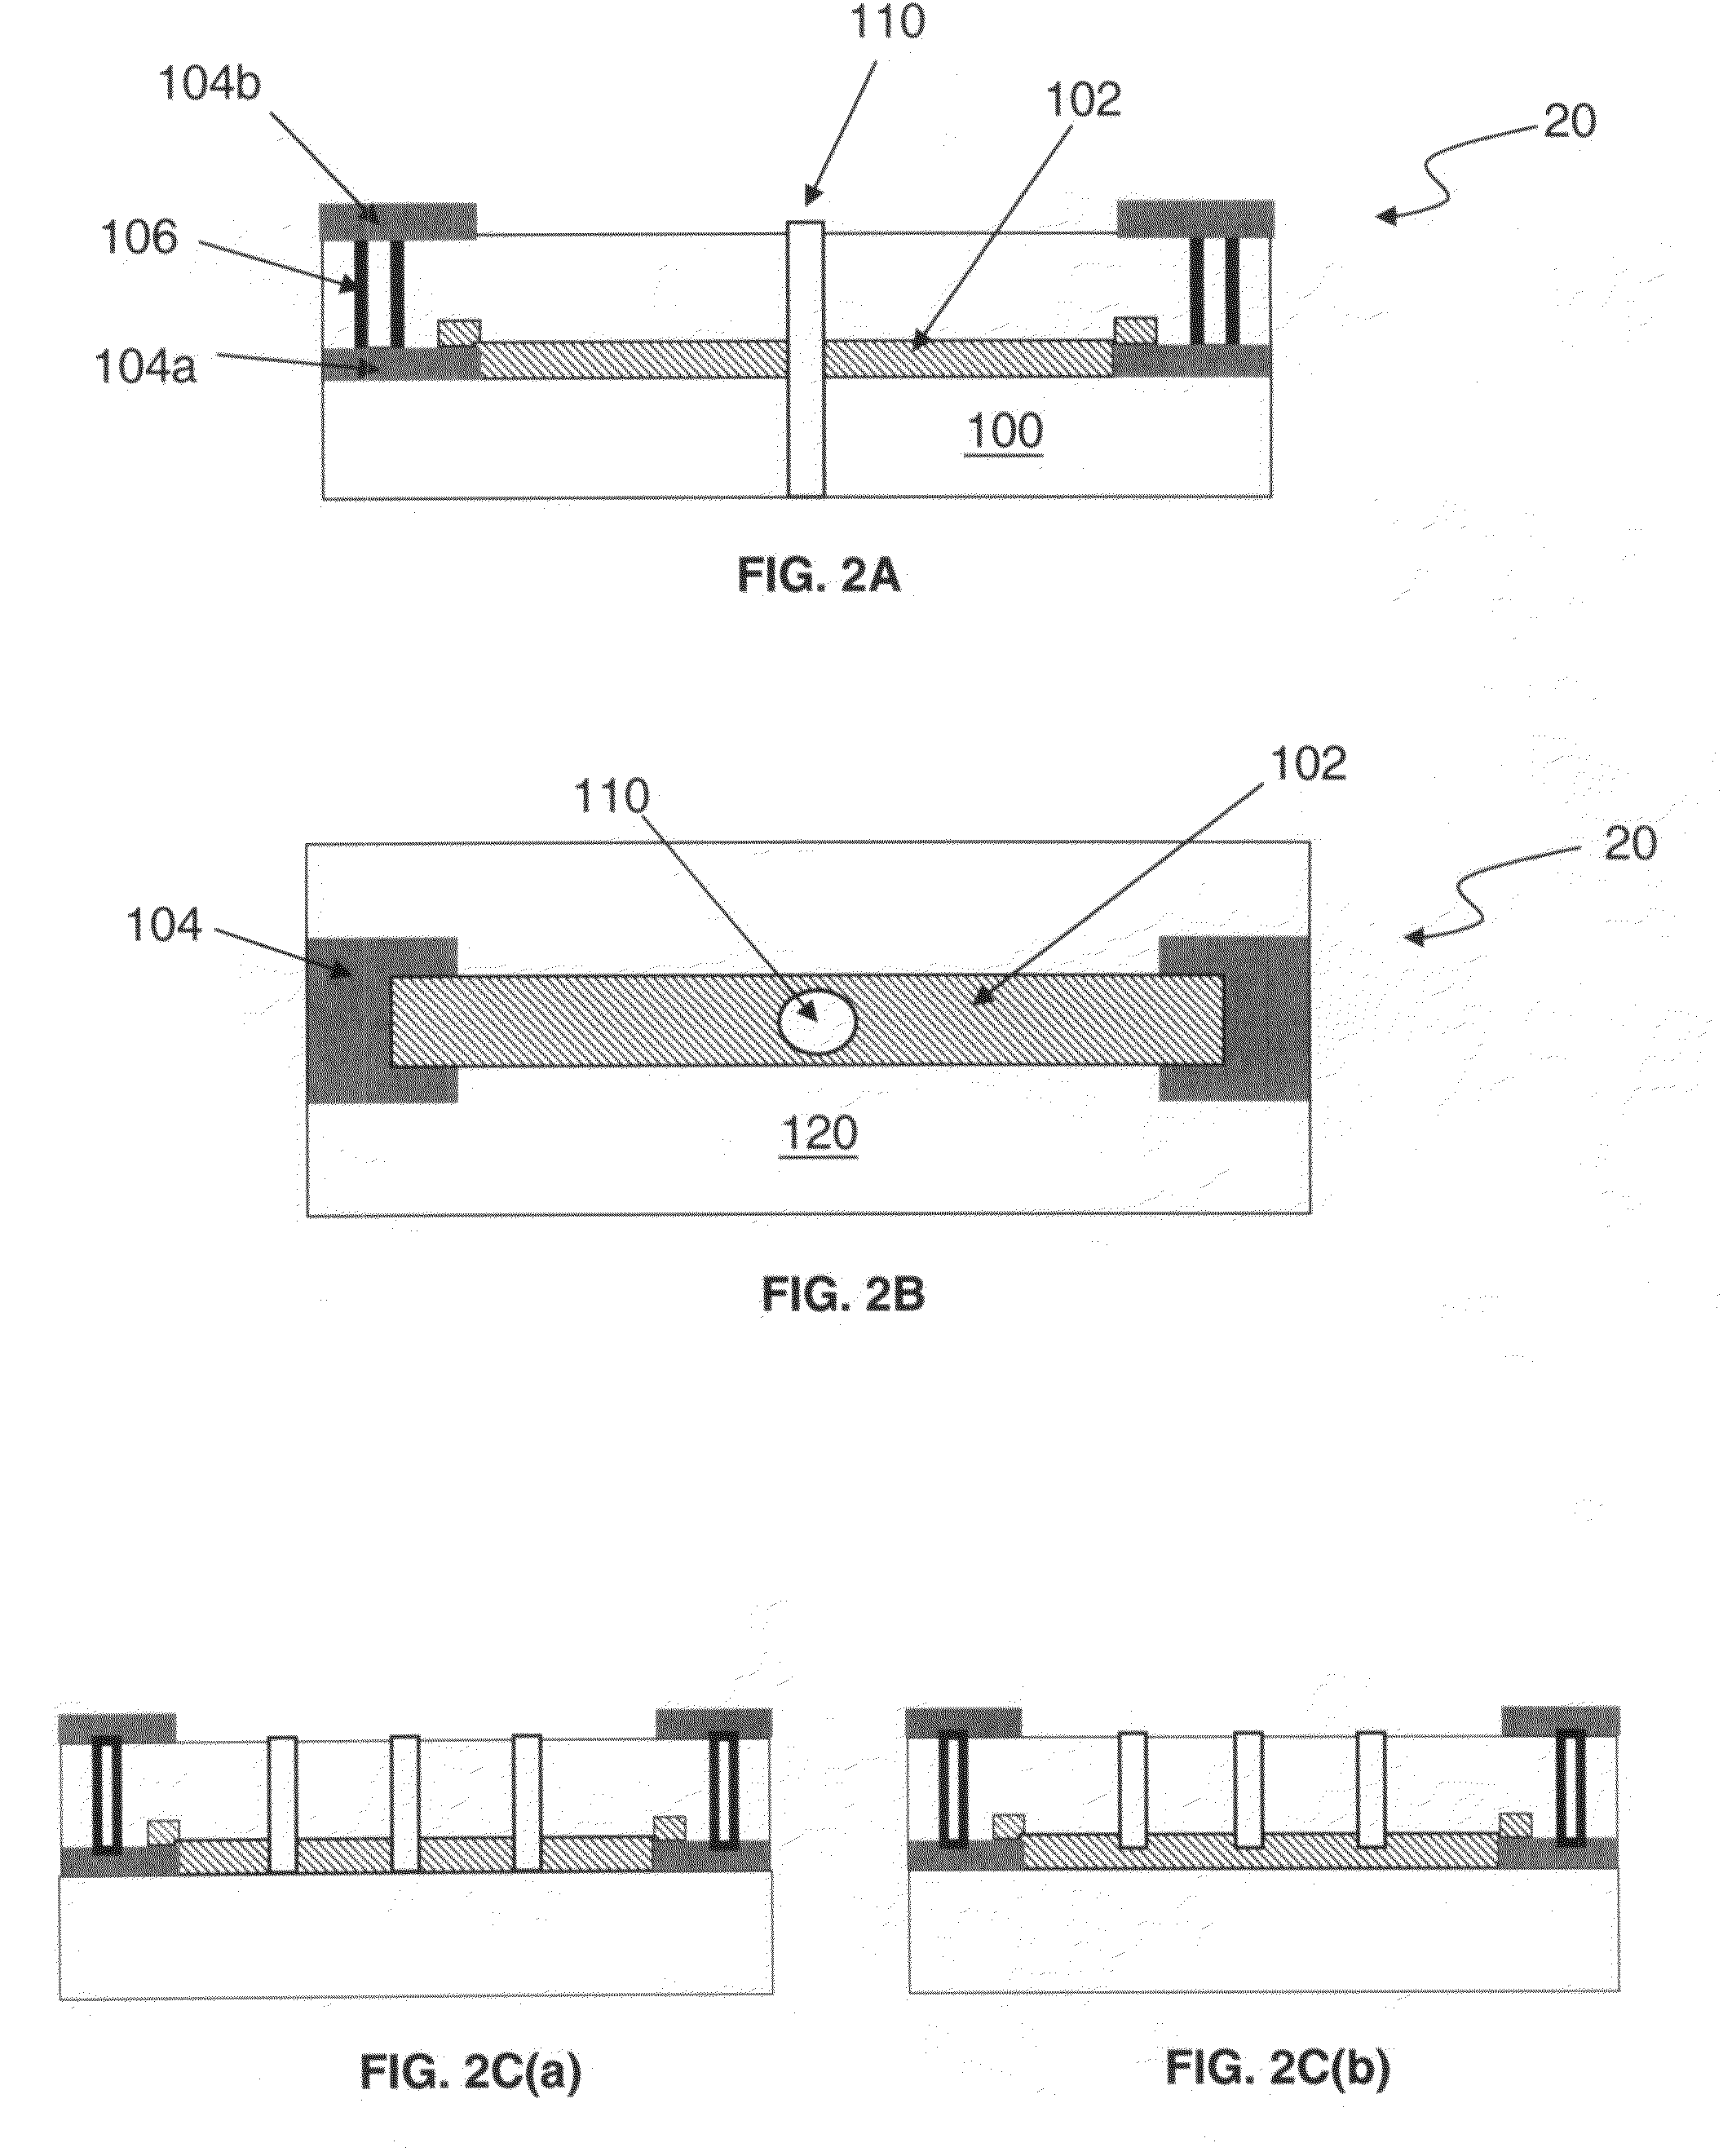 Circuit boards with embedded resistors